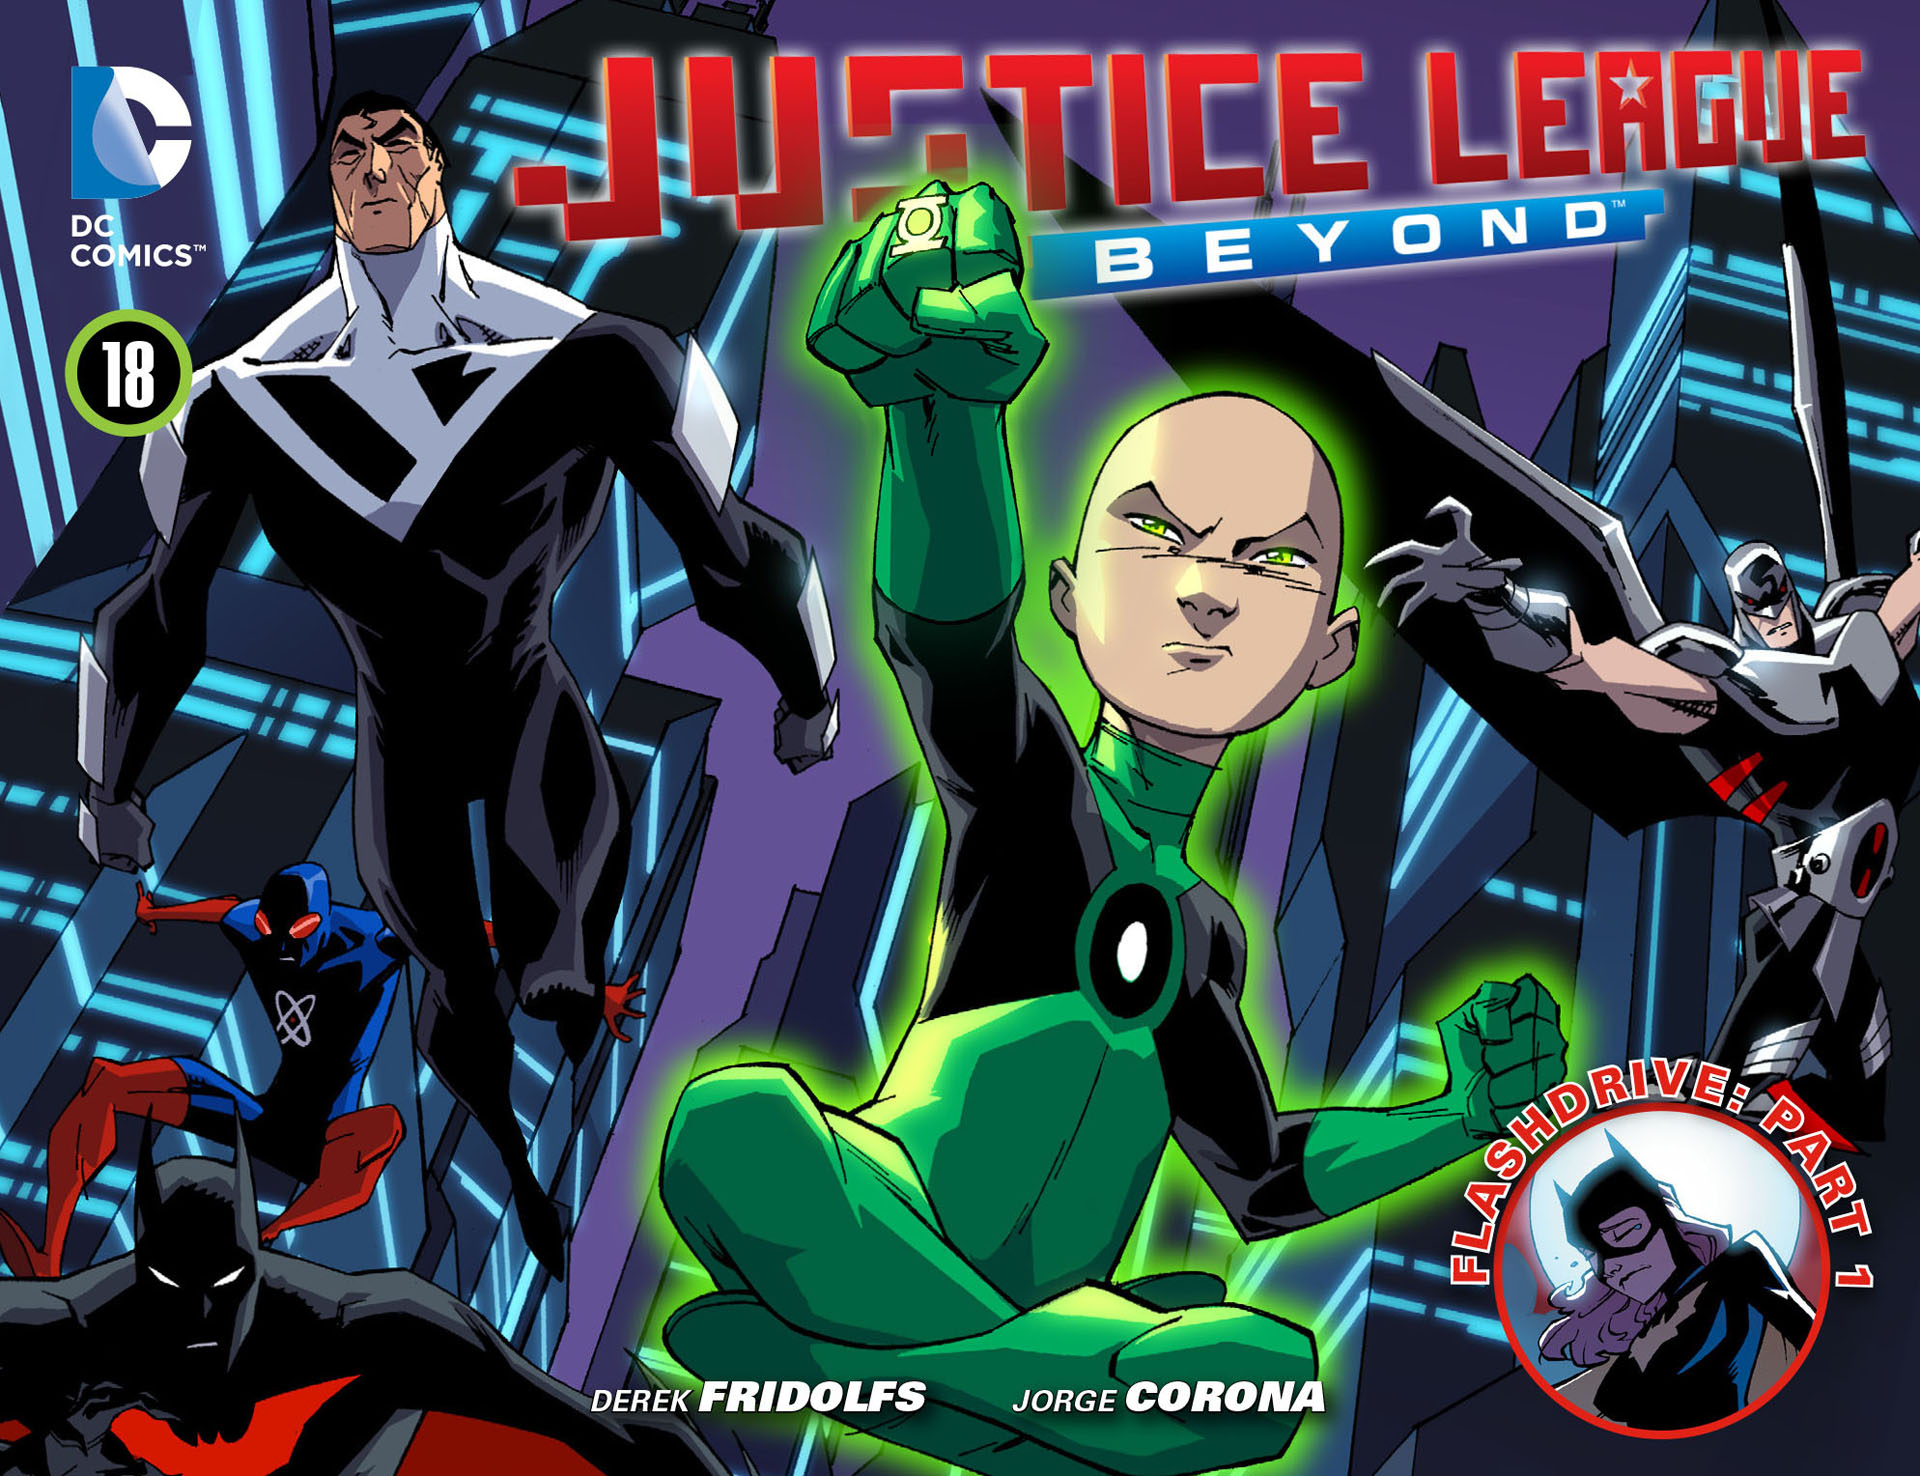 Read online Justice League Beyond comic -  Issue #18 - 1